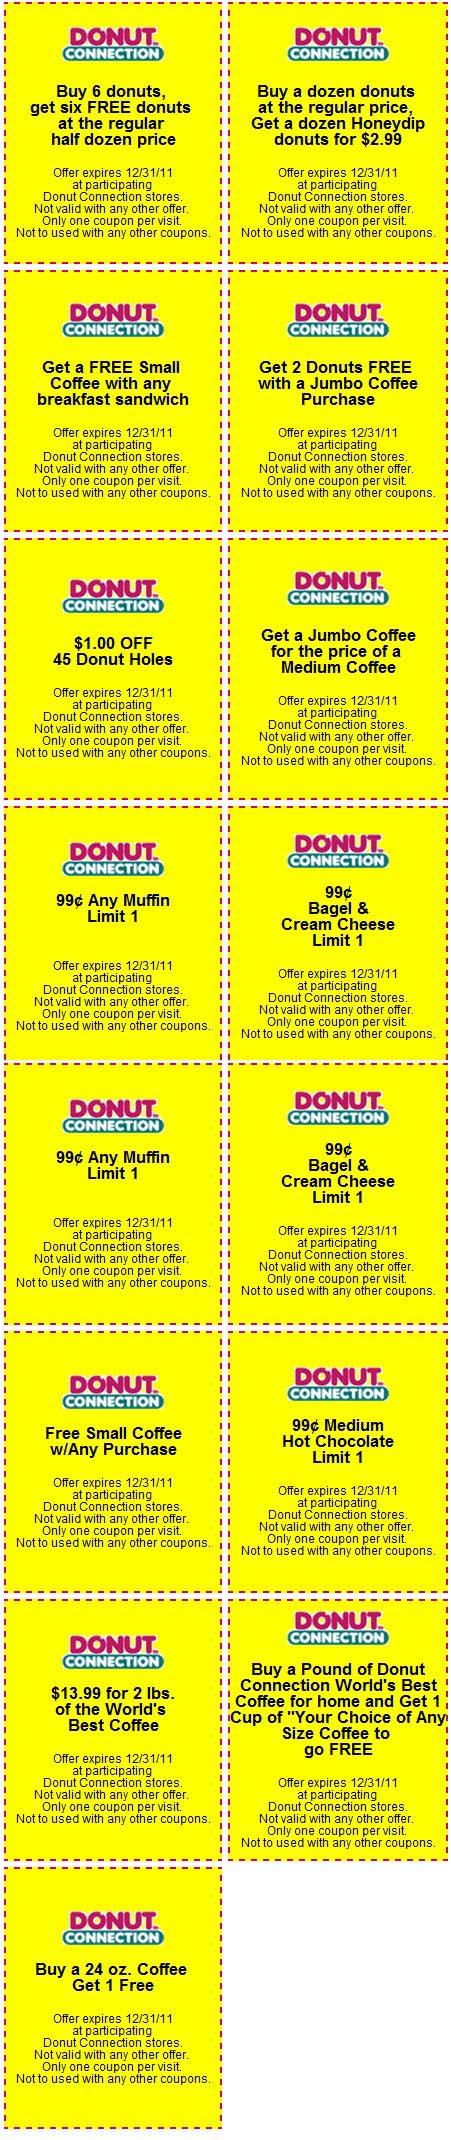 Donut Connection Promo Coupon Codes and Printable Coupons